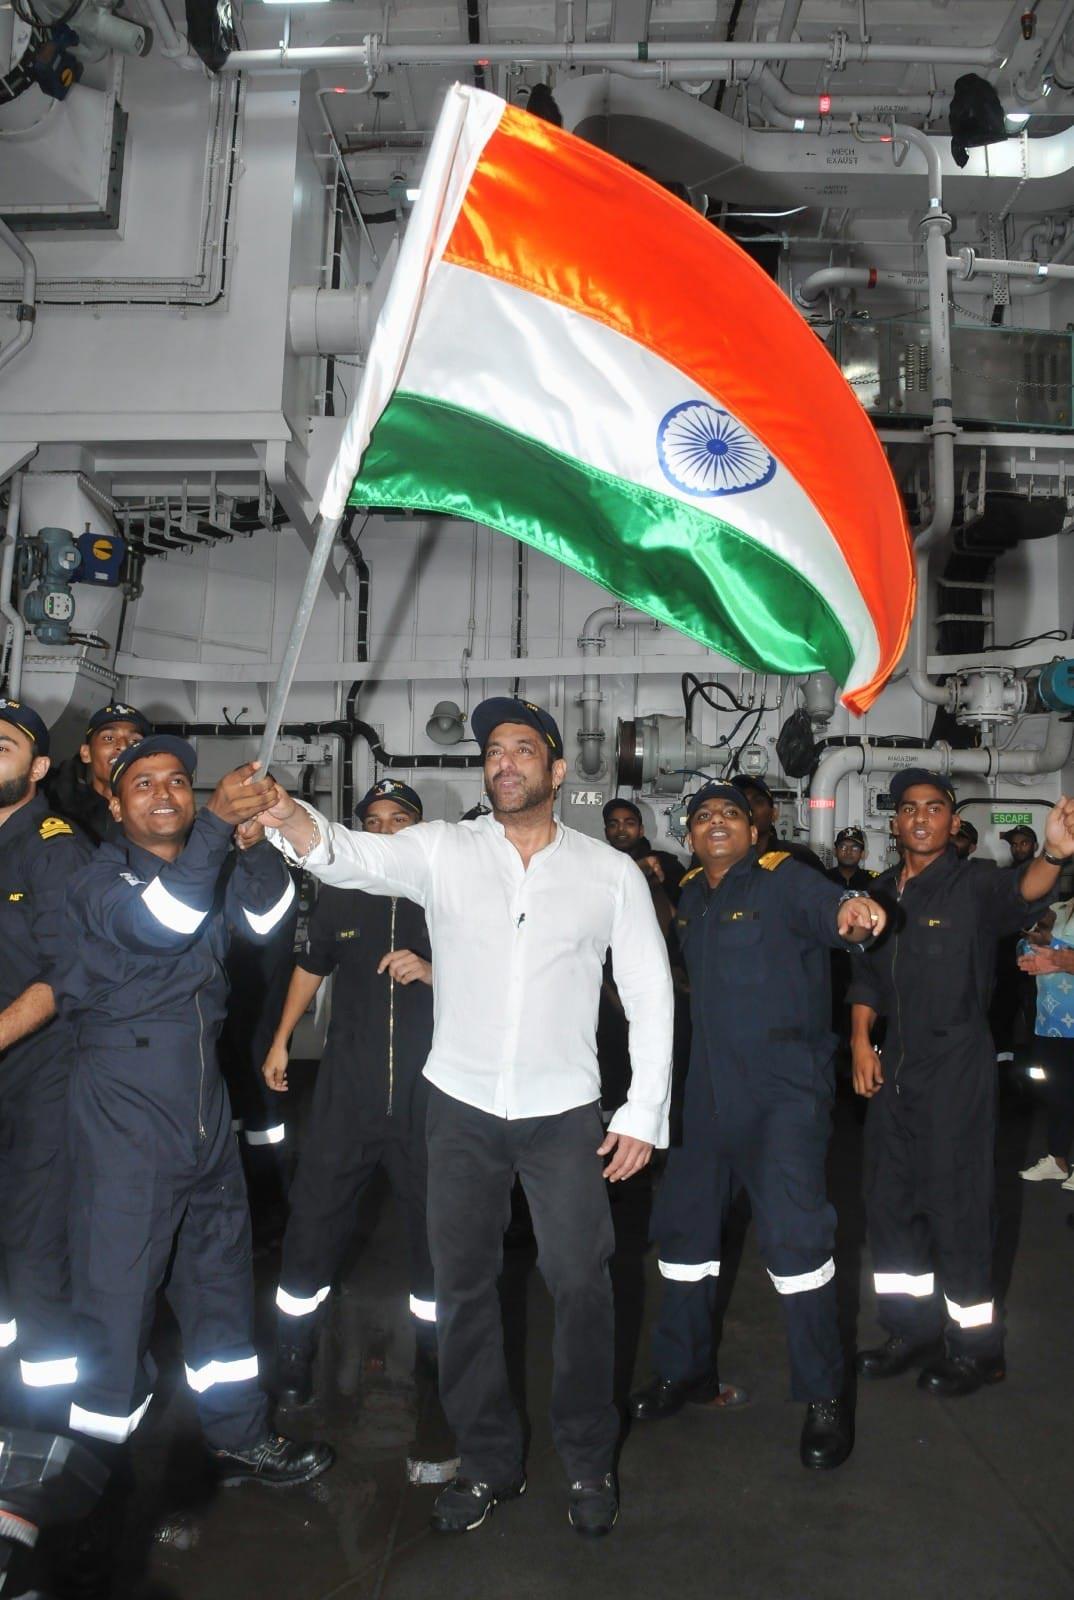 Salman Khan taking a whole day out of his hectic schedule to spend quality time with the sailors on Visakhapatnam who were more than thrilled to have him in their midst